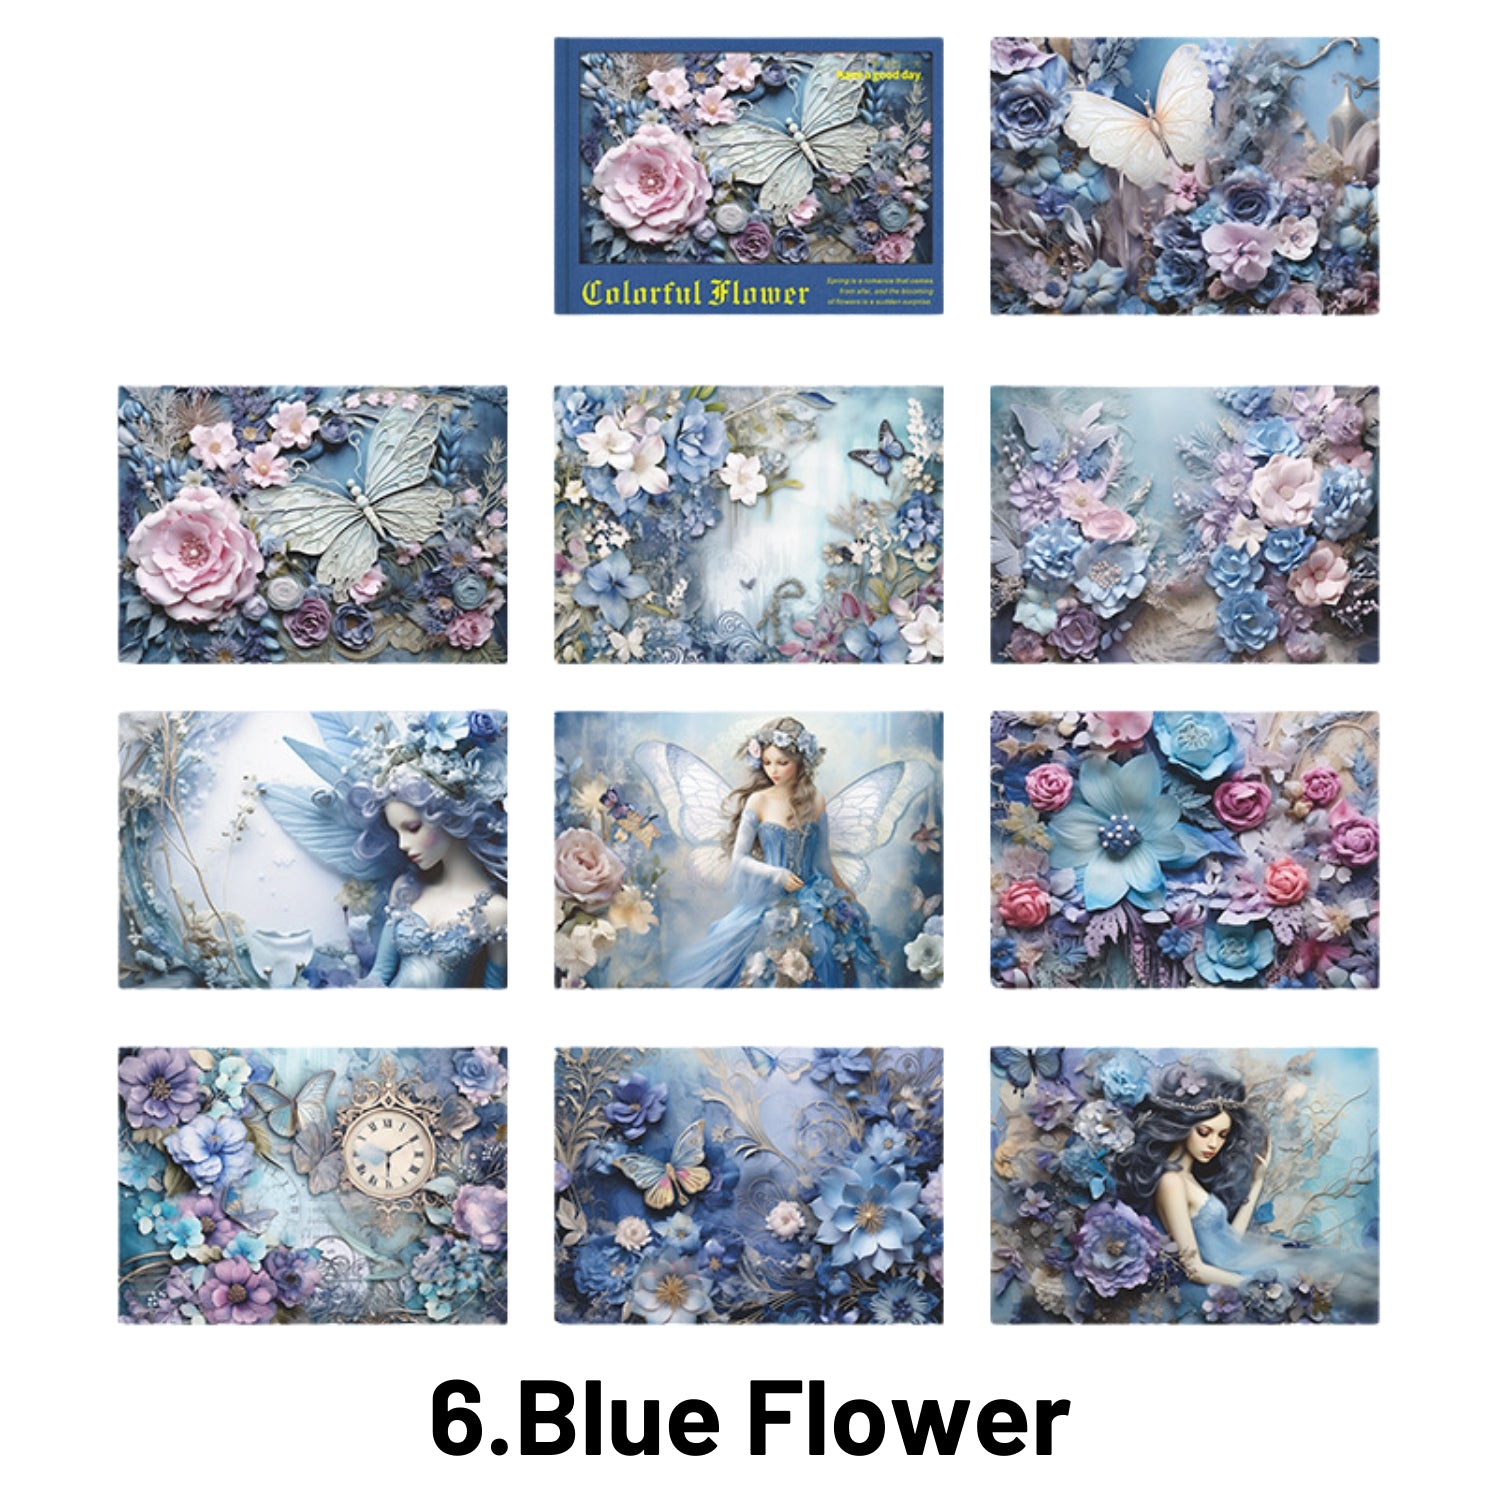 Colorful Flower Language Series Flower Material Book 22